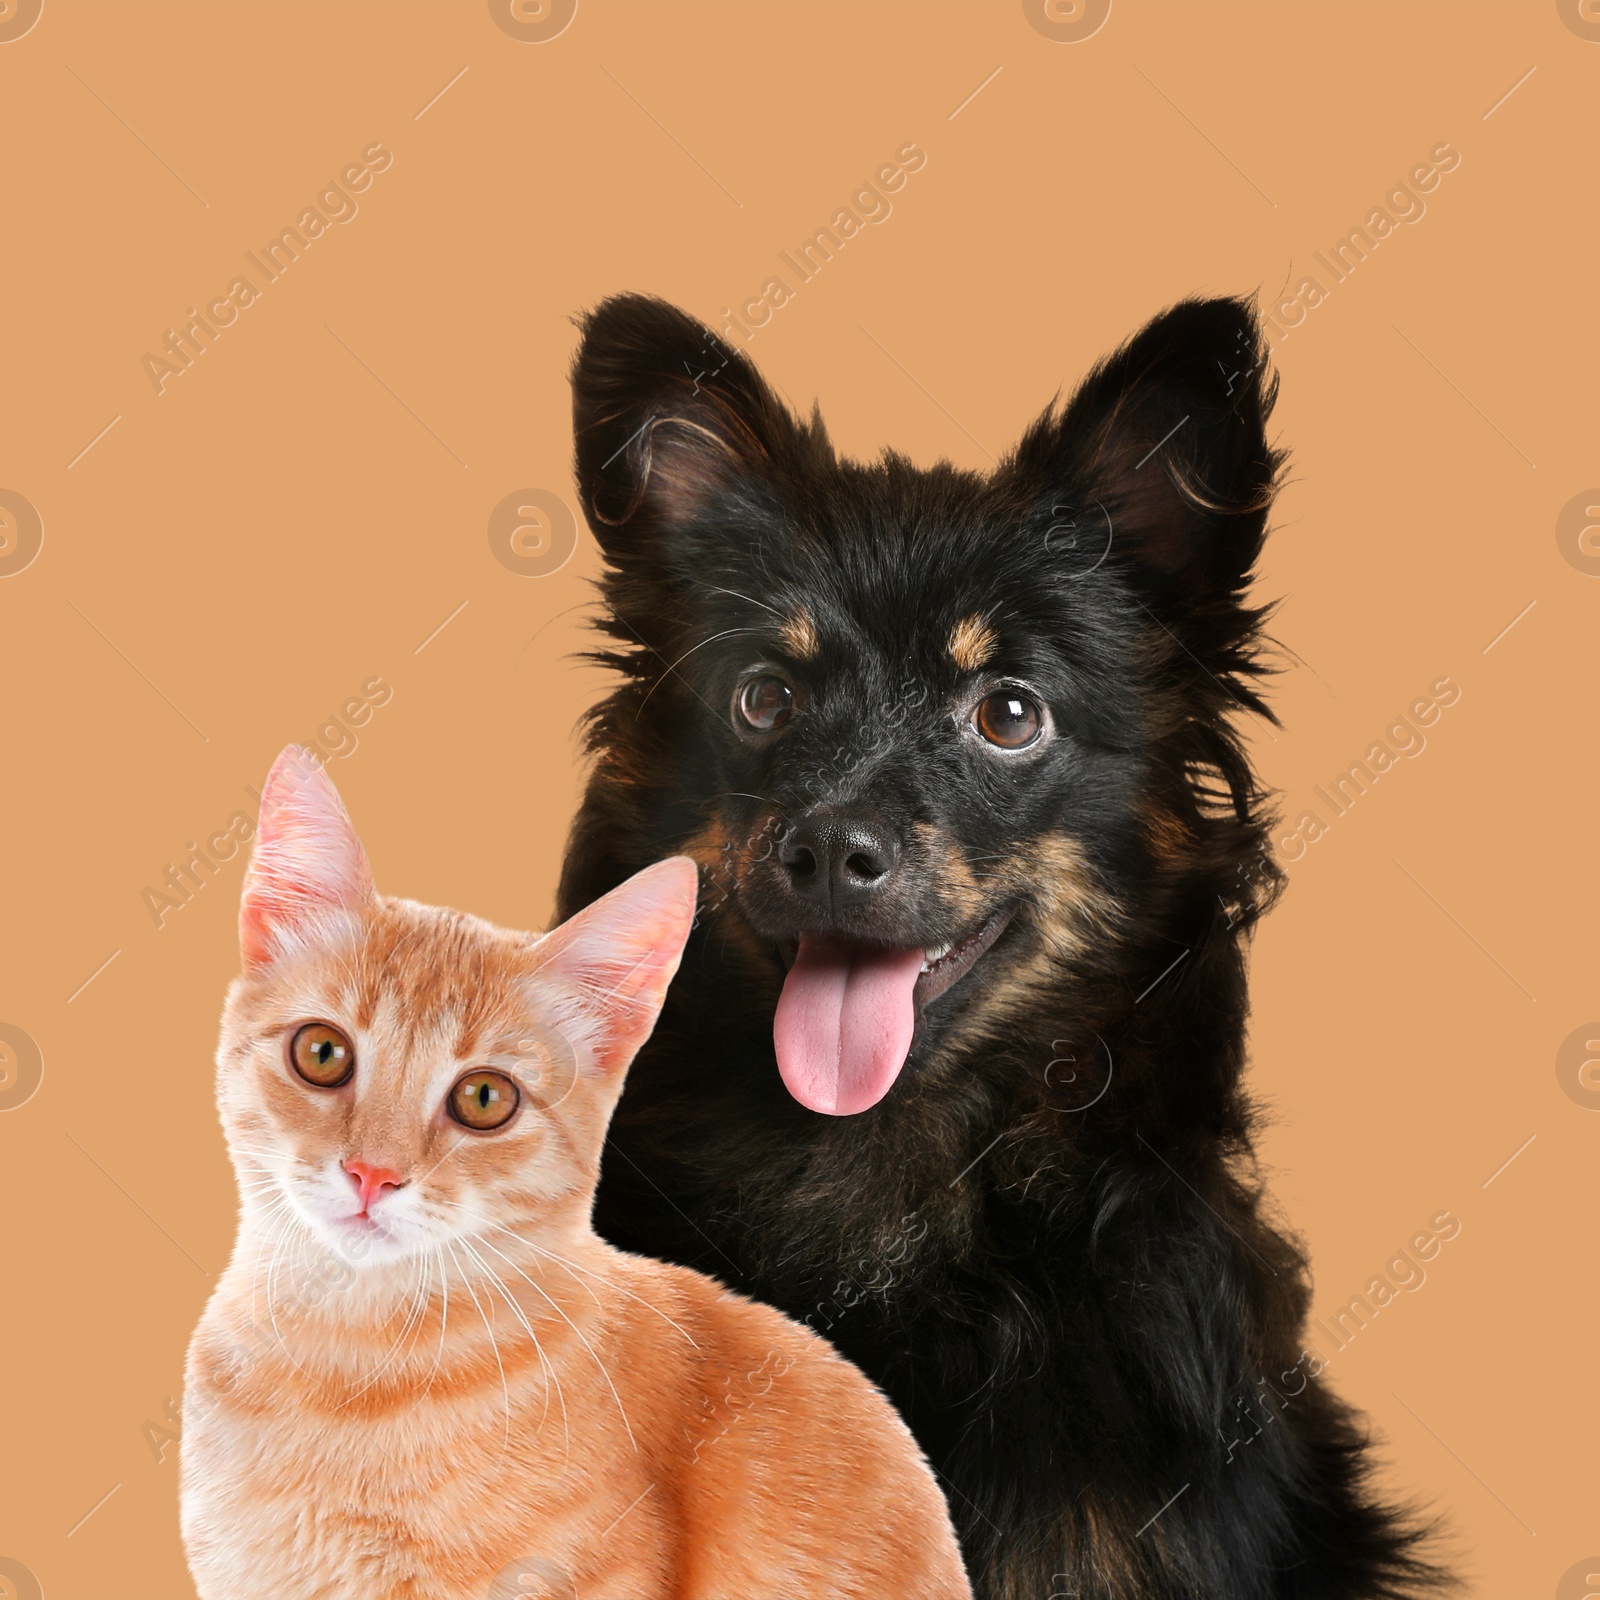 Image of Happy pets. Cute long haired dog and tabby cat on pale orange background